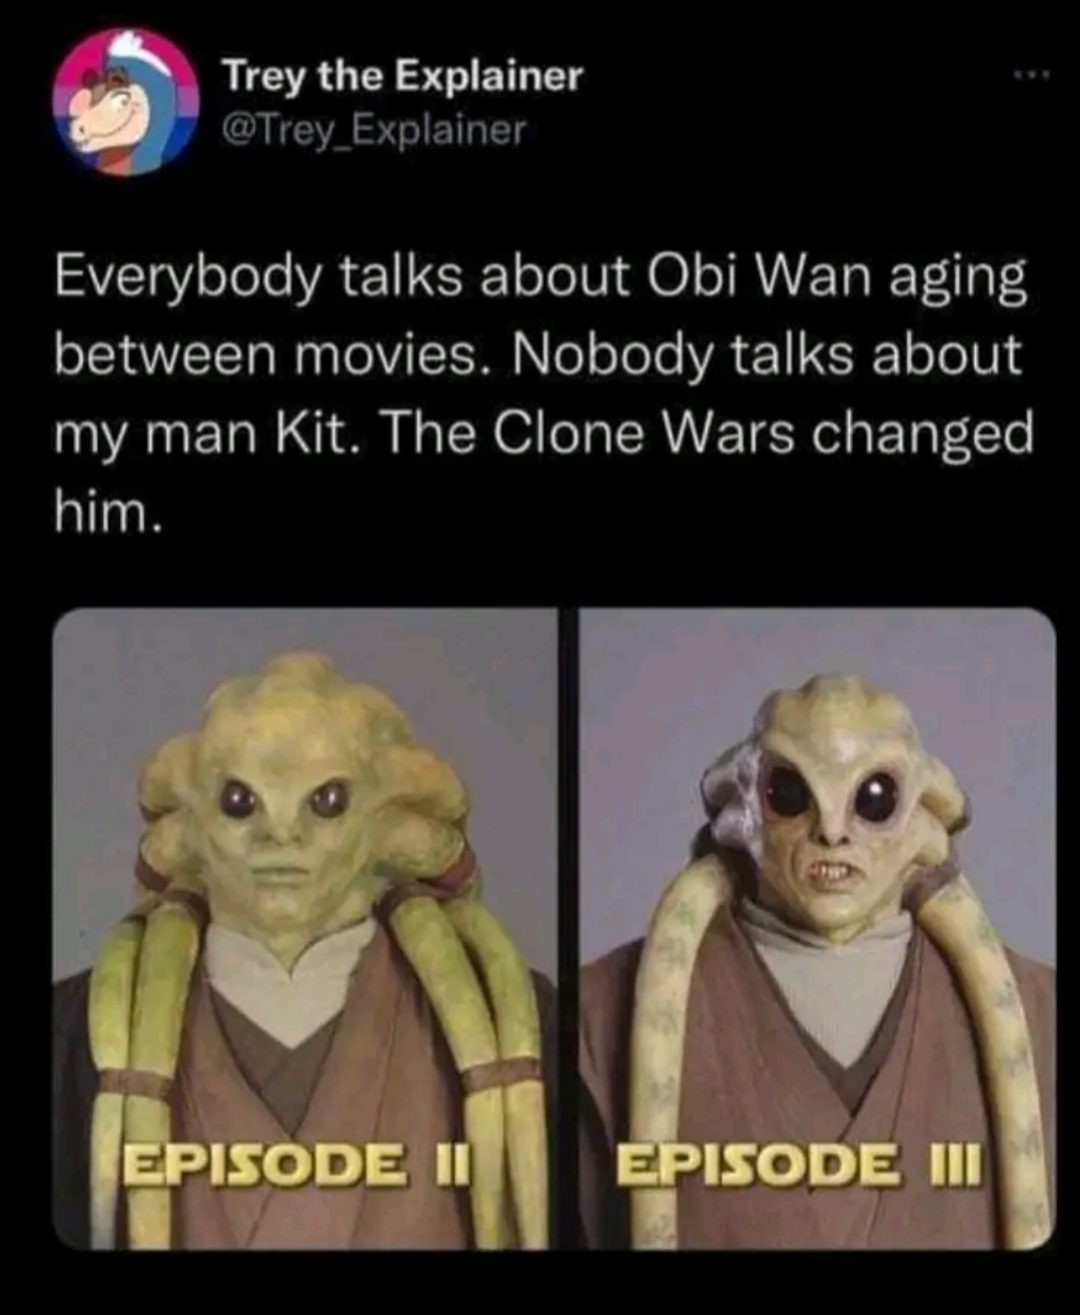 funny tweets memes and pics - kit fisto - Trey the Explainer Everybody talks about Obi Wan aging between movies. Nobody talks about my man Kit. The Clone Wars changed him. Episode Ii Episode Iii